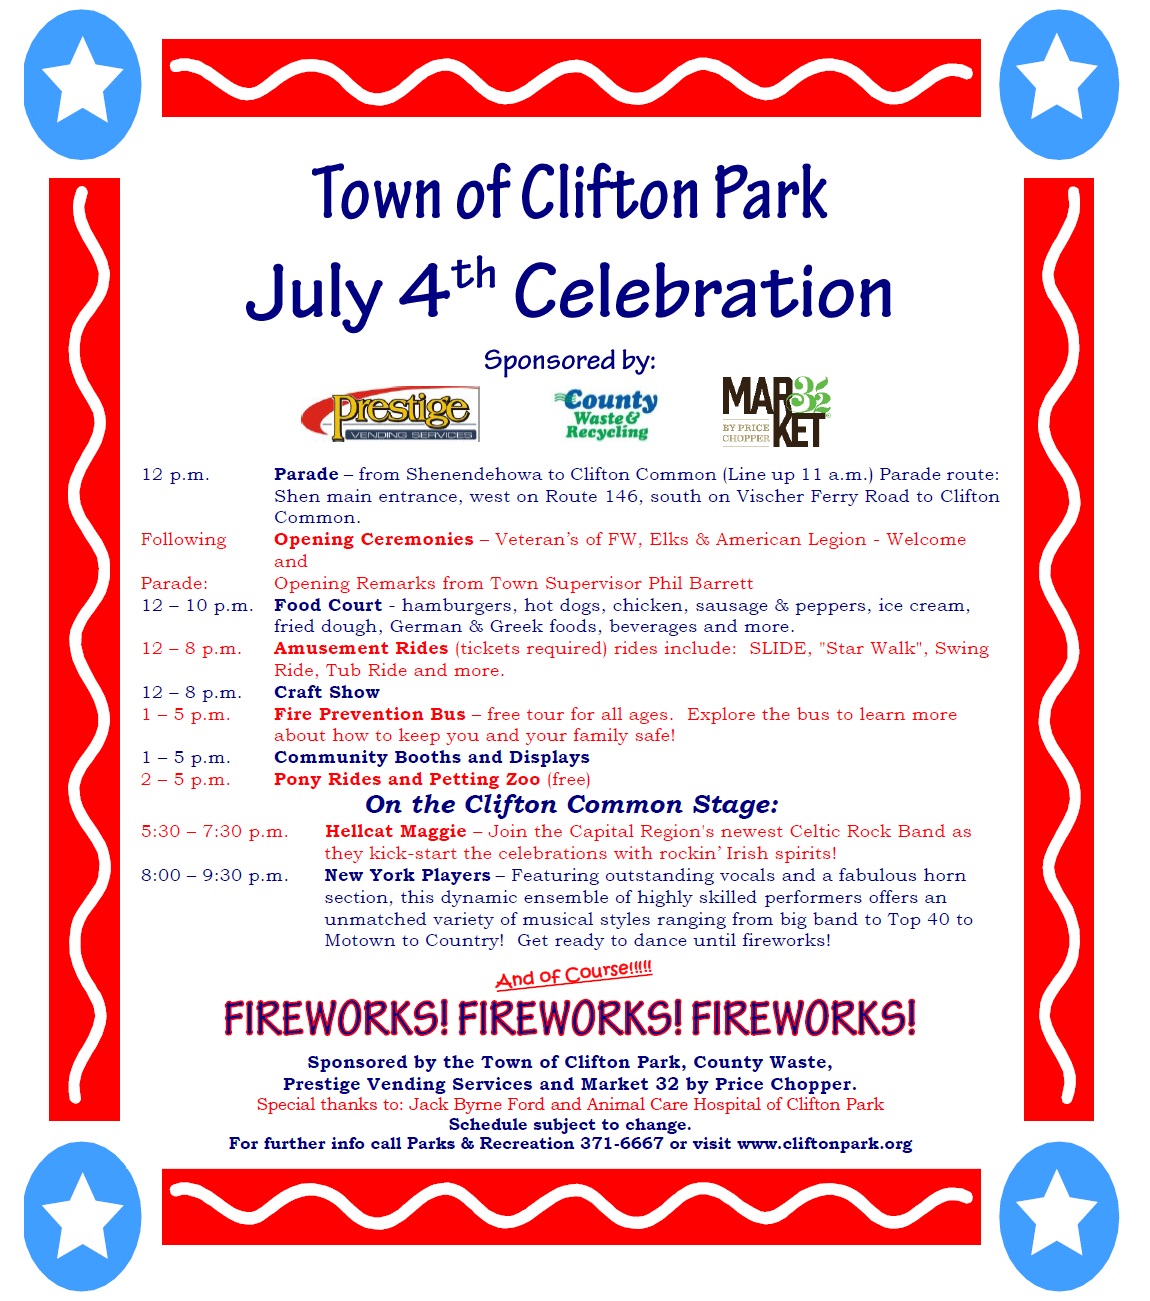 2017 July 4th Schedule of Events